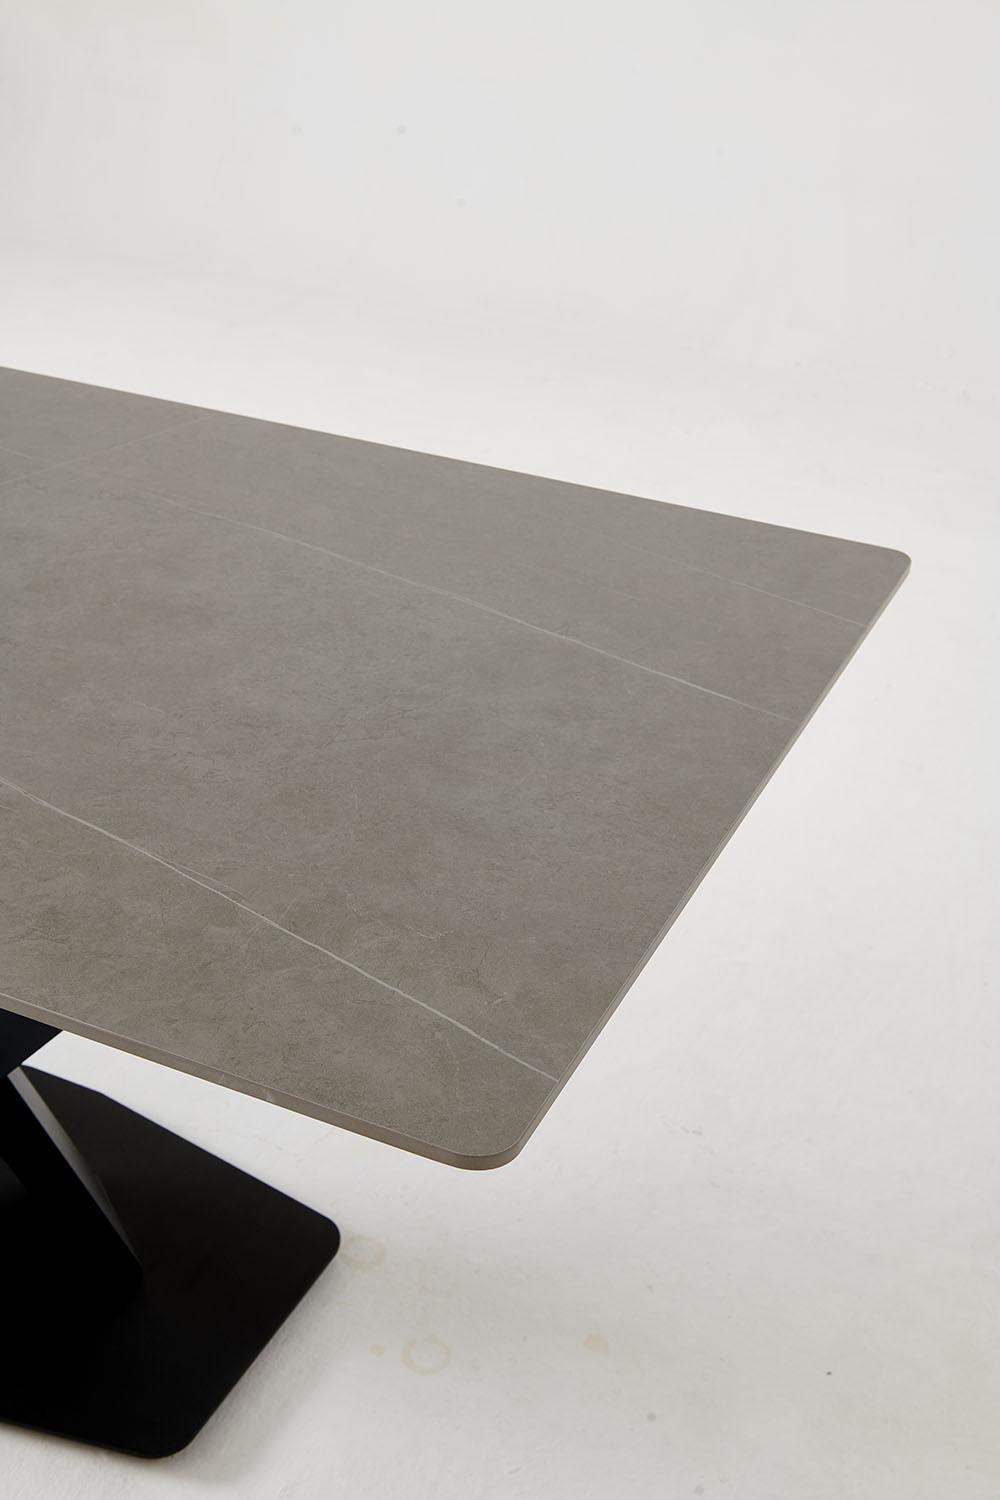 Pandora Office Marble Table with Rock Plate Top